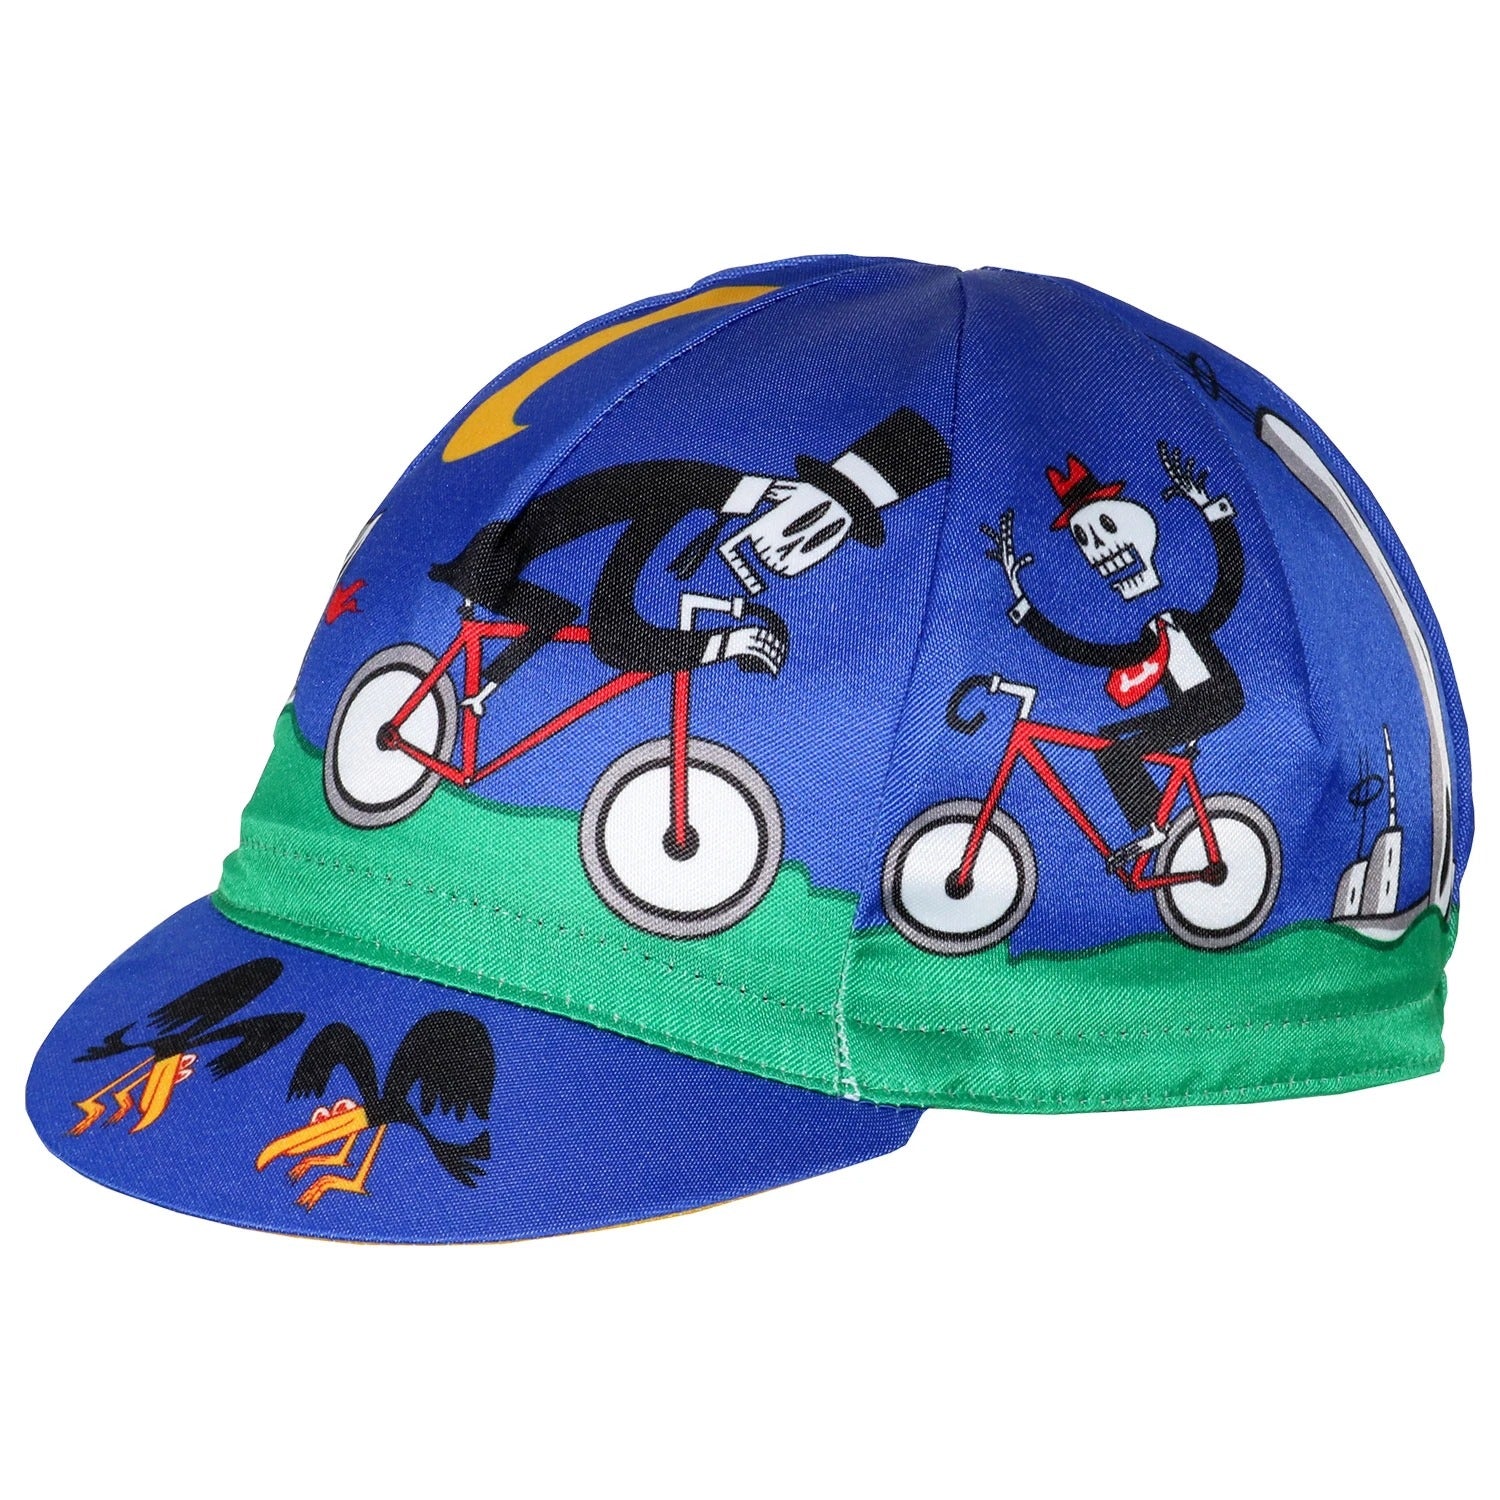 CINELLI Cycling Cap by Massimo Giacon